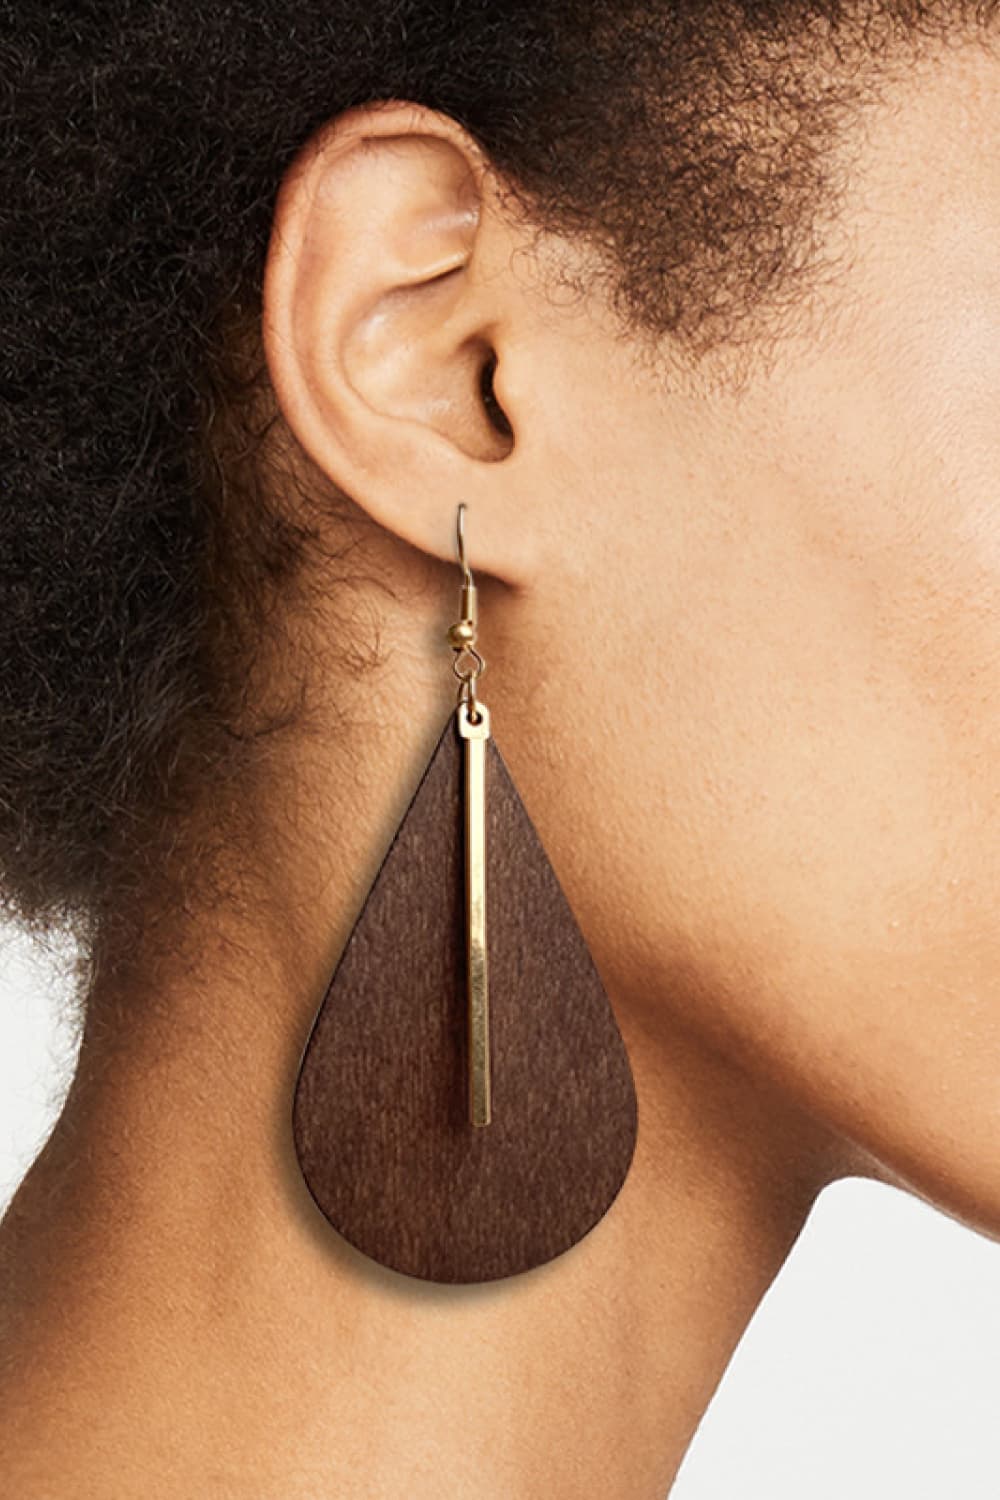 Geometrical Shape Wooden Dangle Earrings Additional Options Available